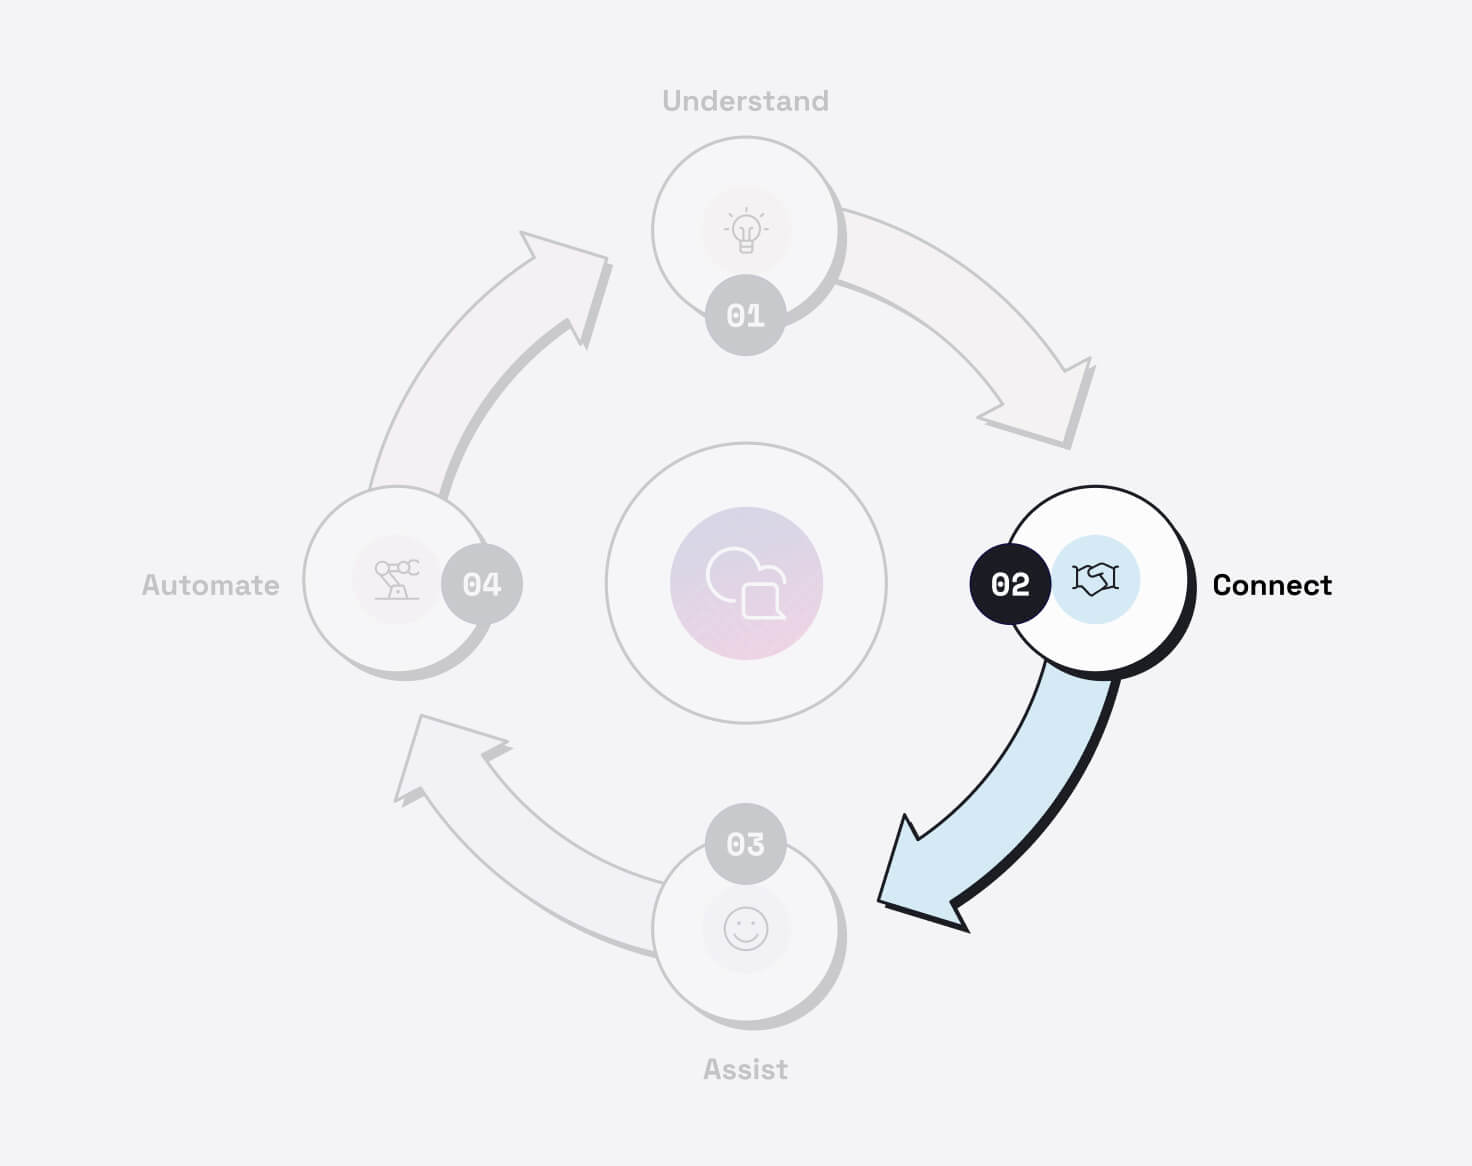 Step 2 of the flywheel for the best conversational AI platforms, focusing on connecting with customers across multiple channels 